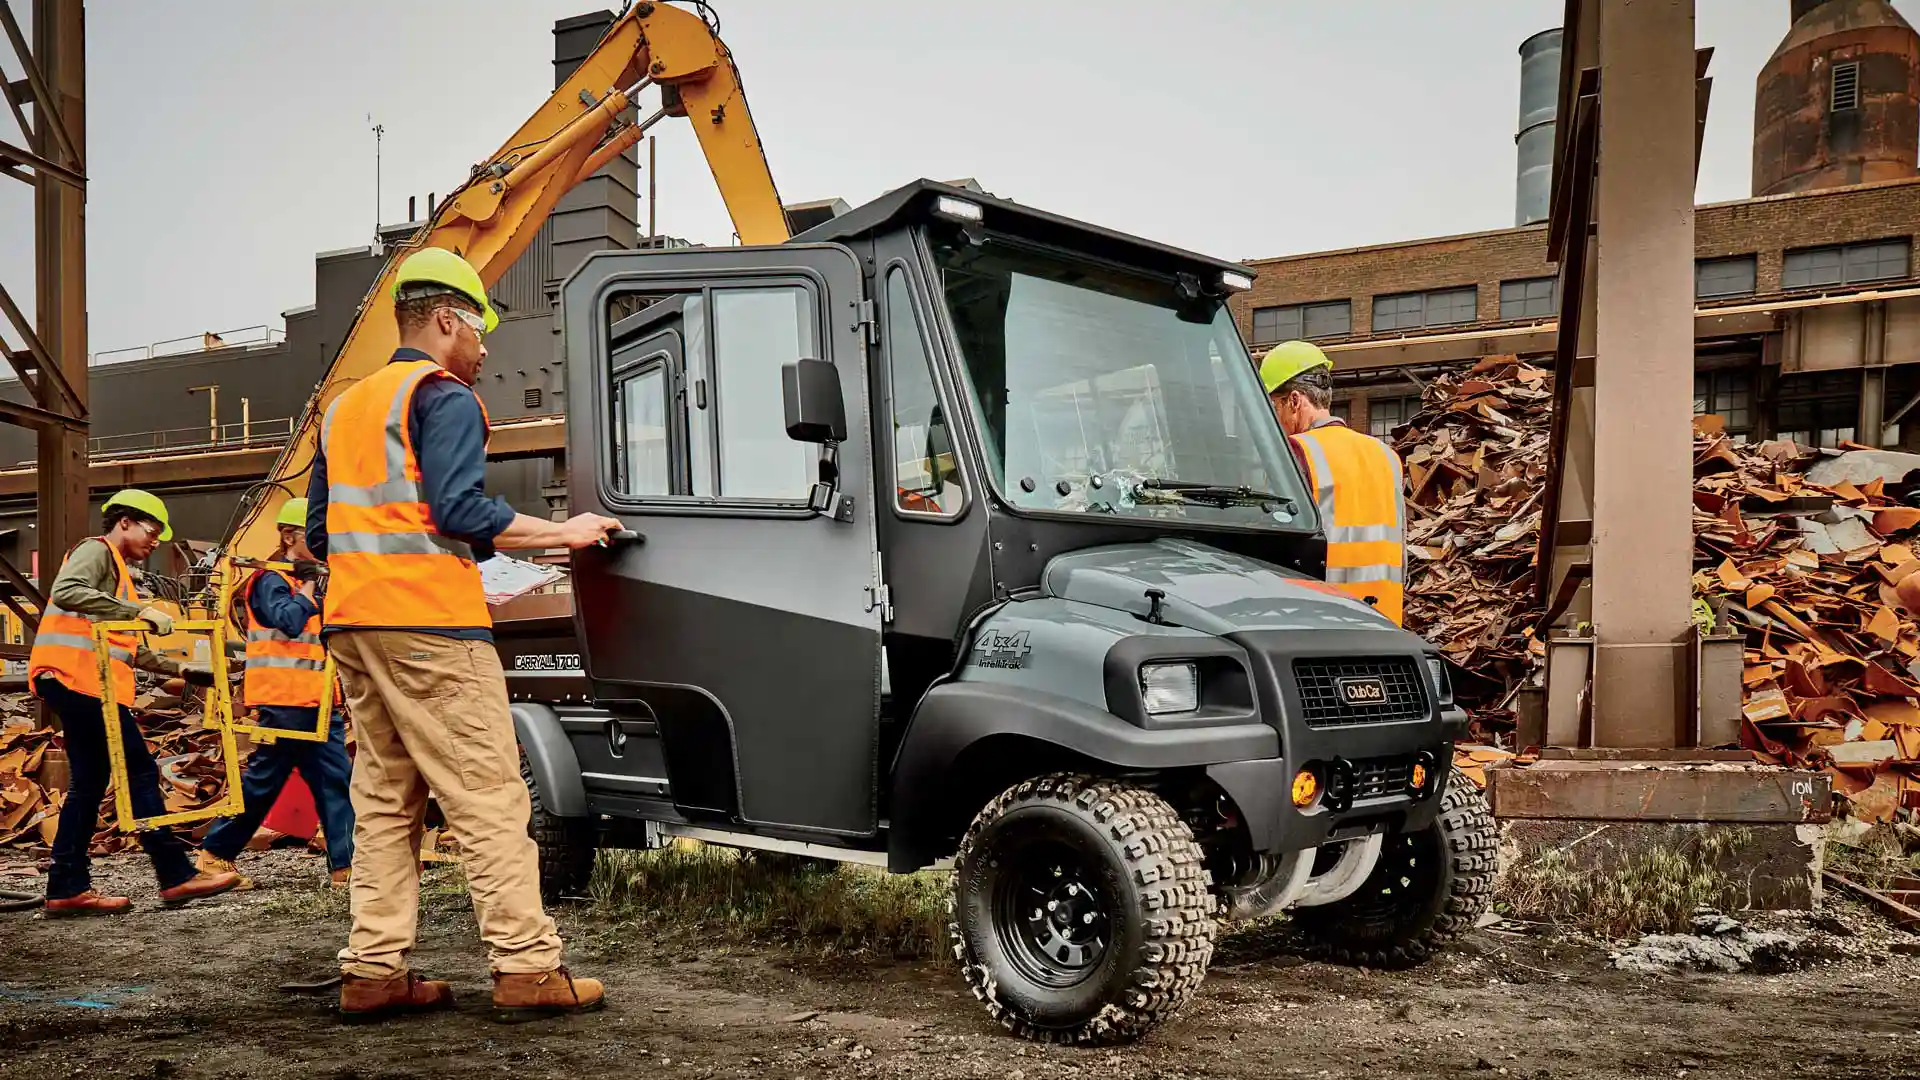 Carryall 1700 4x4 4-seater utility vehicle at construction site